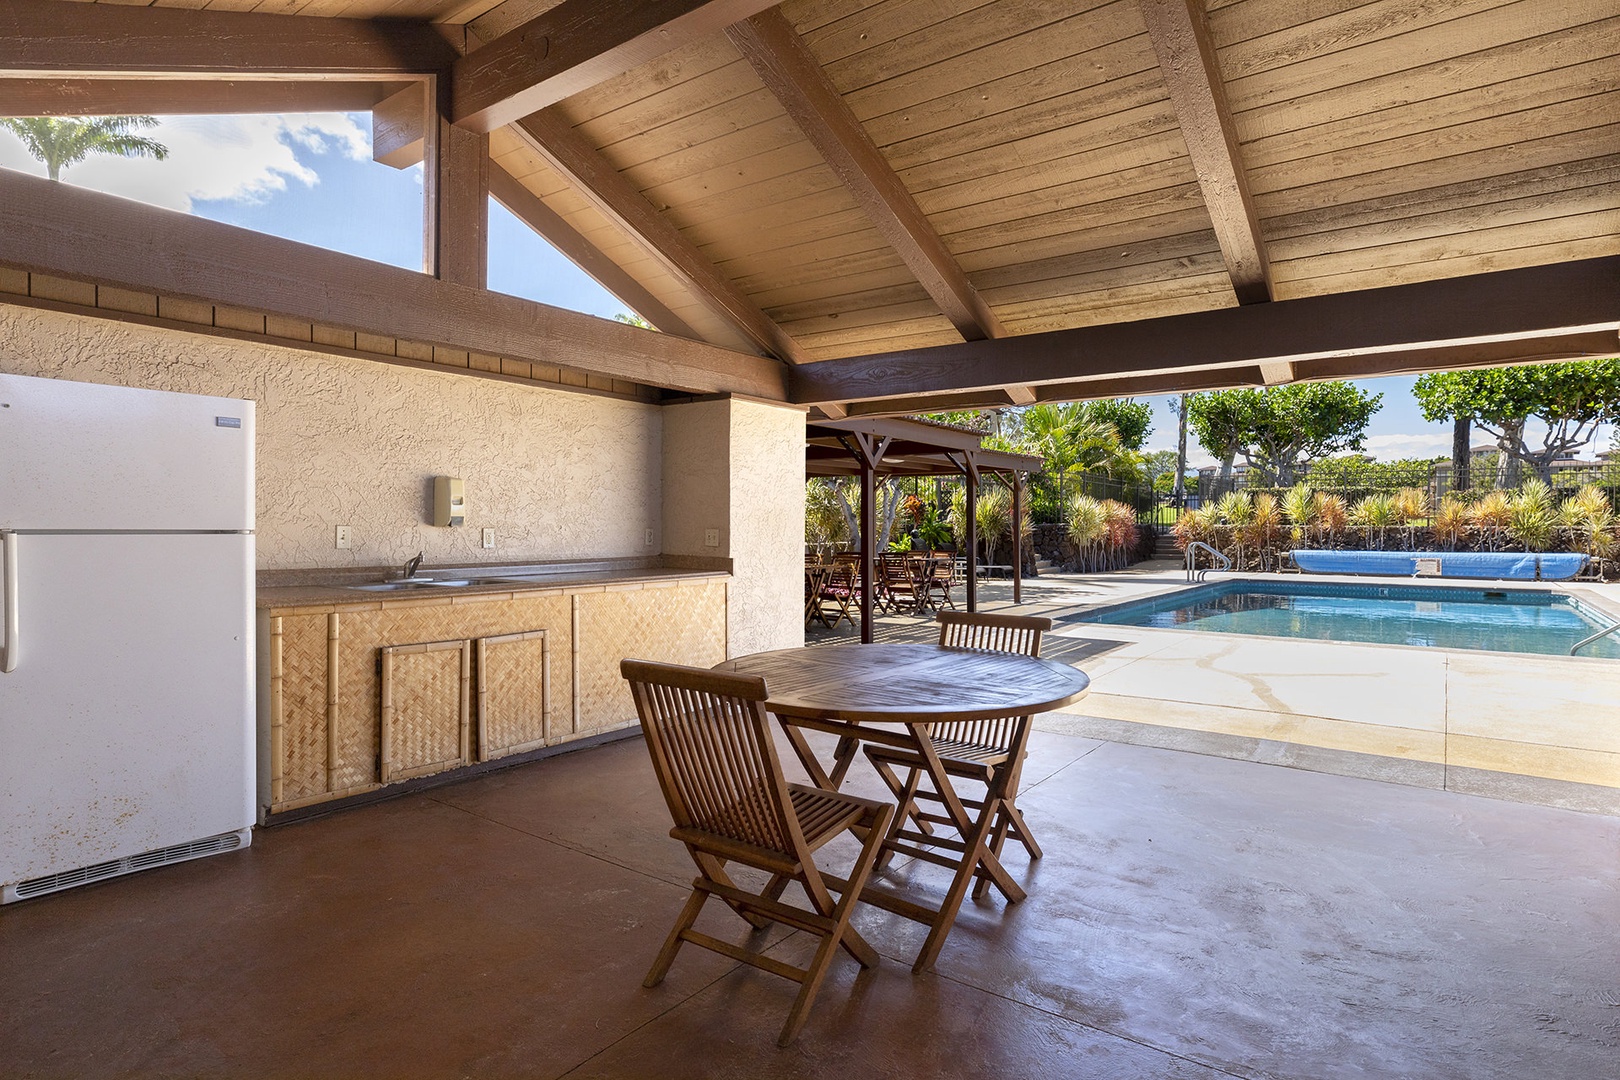 Poolside seating & BBQ area